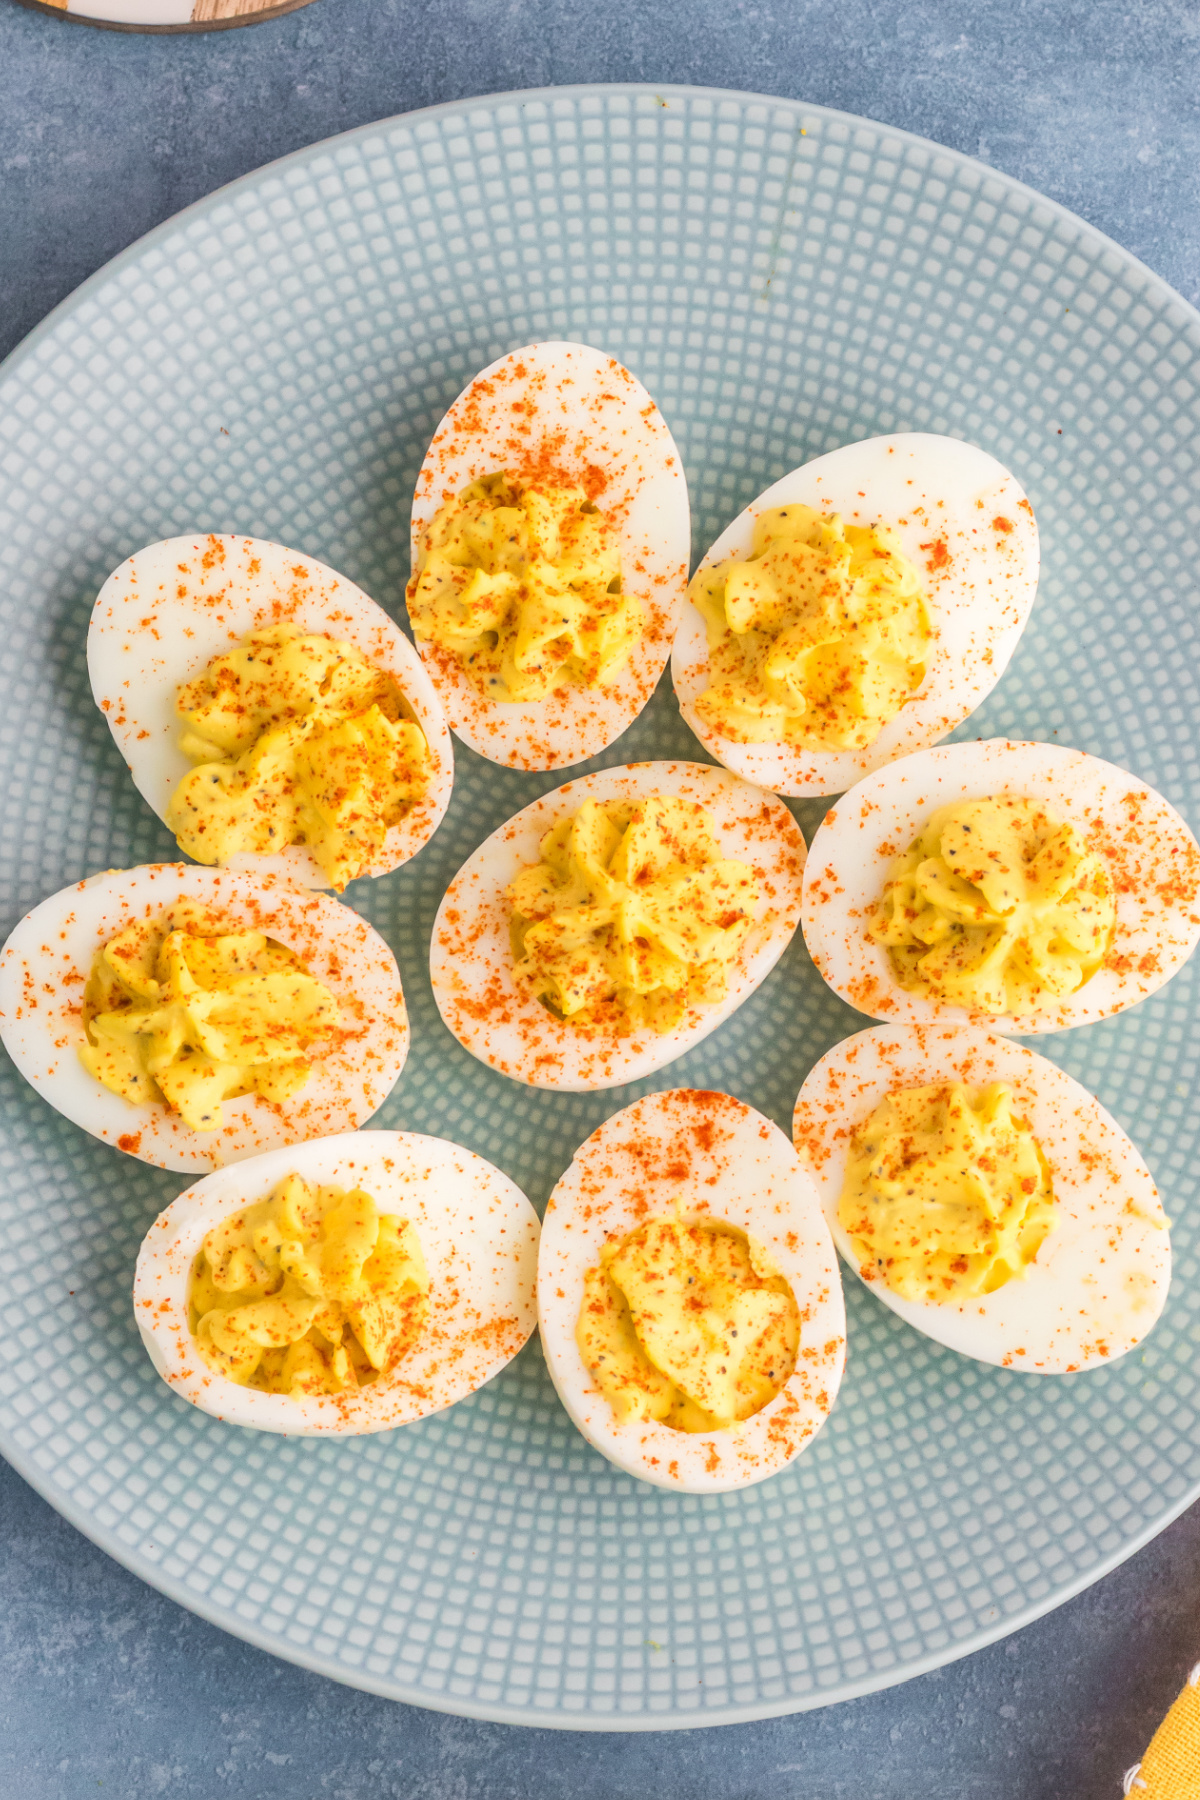 A plate of deviled eggs sprinkled with paprika.